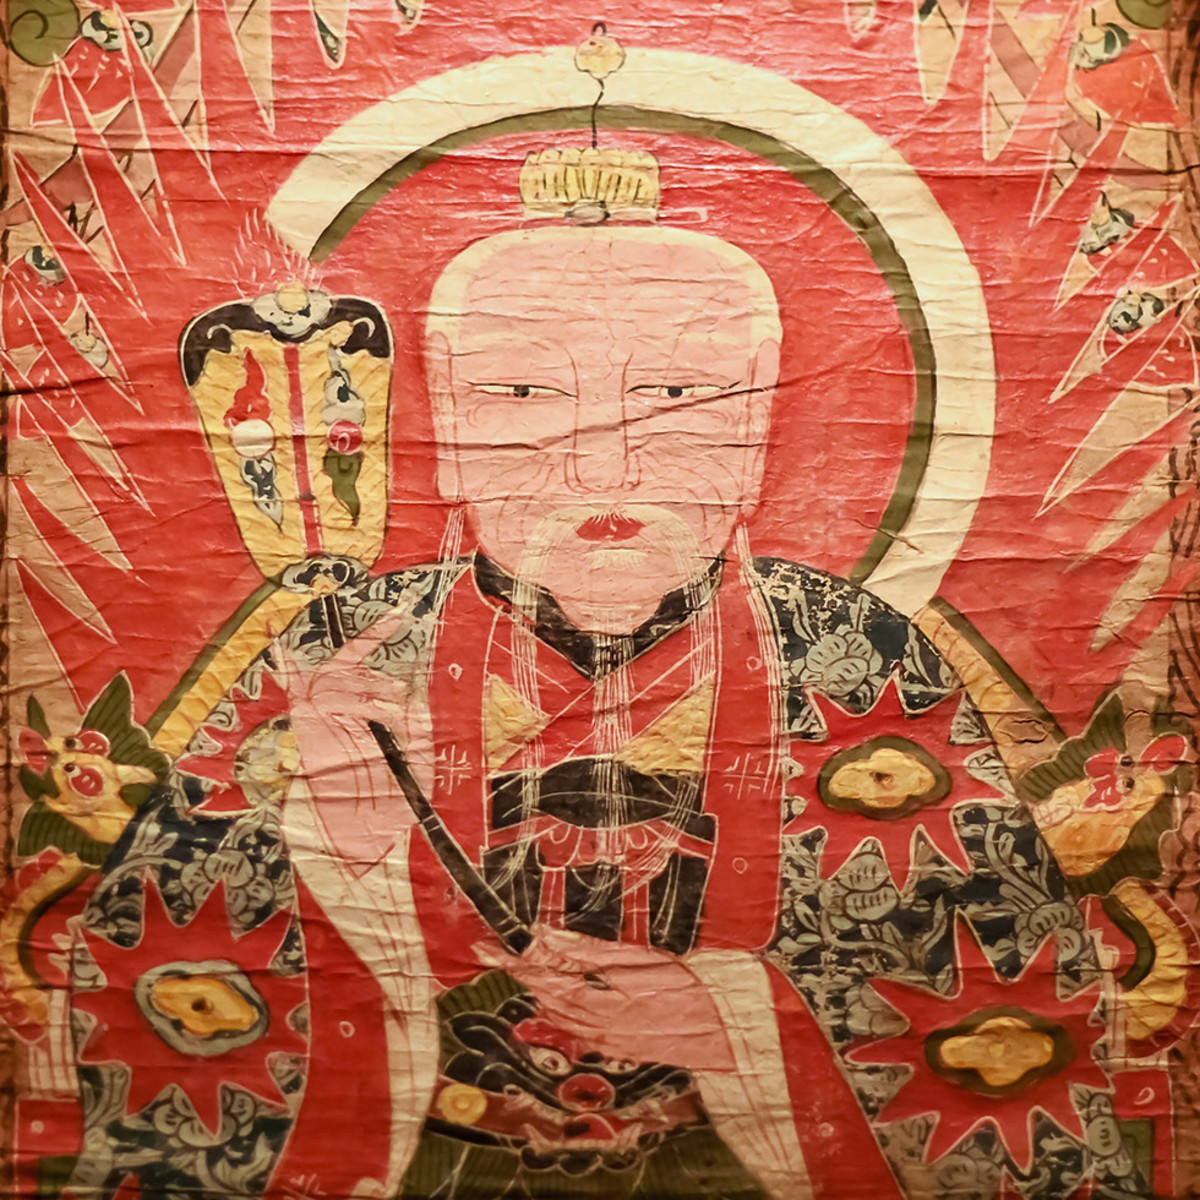 Taishang Laojun, also known as Daode Tianjun, is one of the highest divinities in the Taoist pantheon. Laozi, the Warring States Era philosopher who founded Taoism, is believed to be an avatar of Laojun.